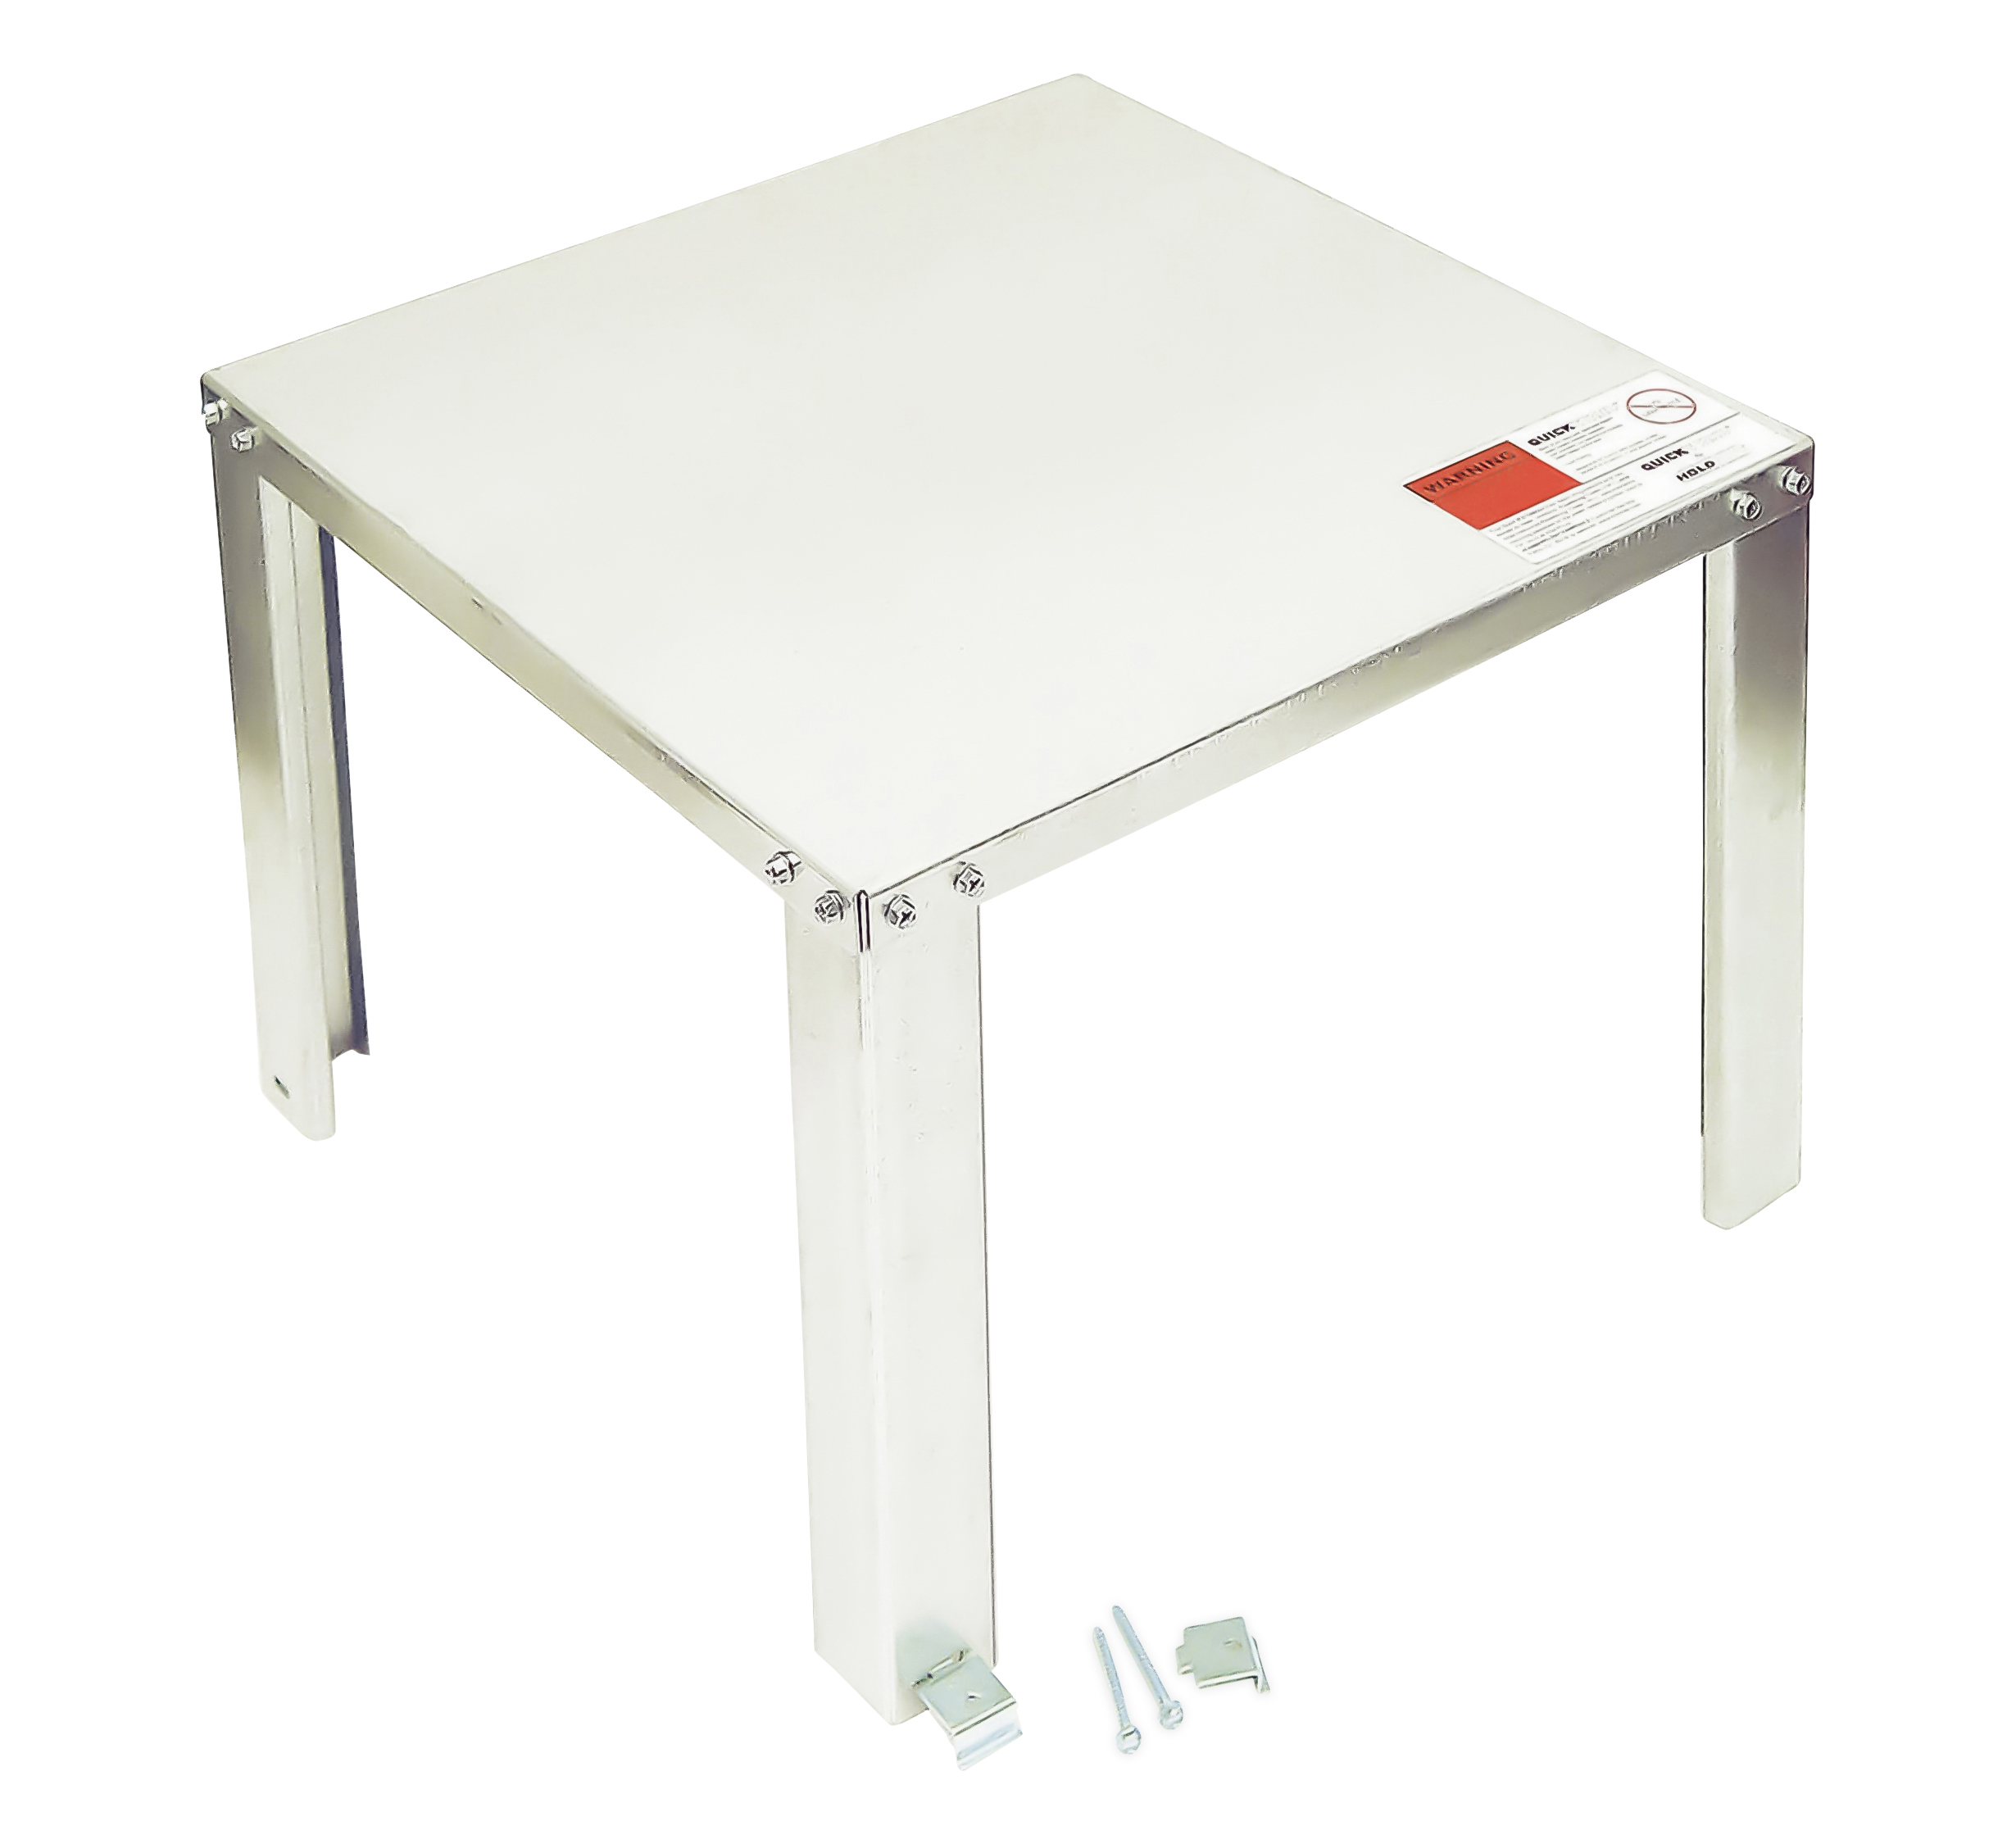 WSC - AO SMITH 100110452:K,WATER HEATER STAND (replaces 9005399105)